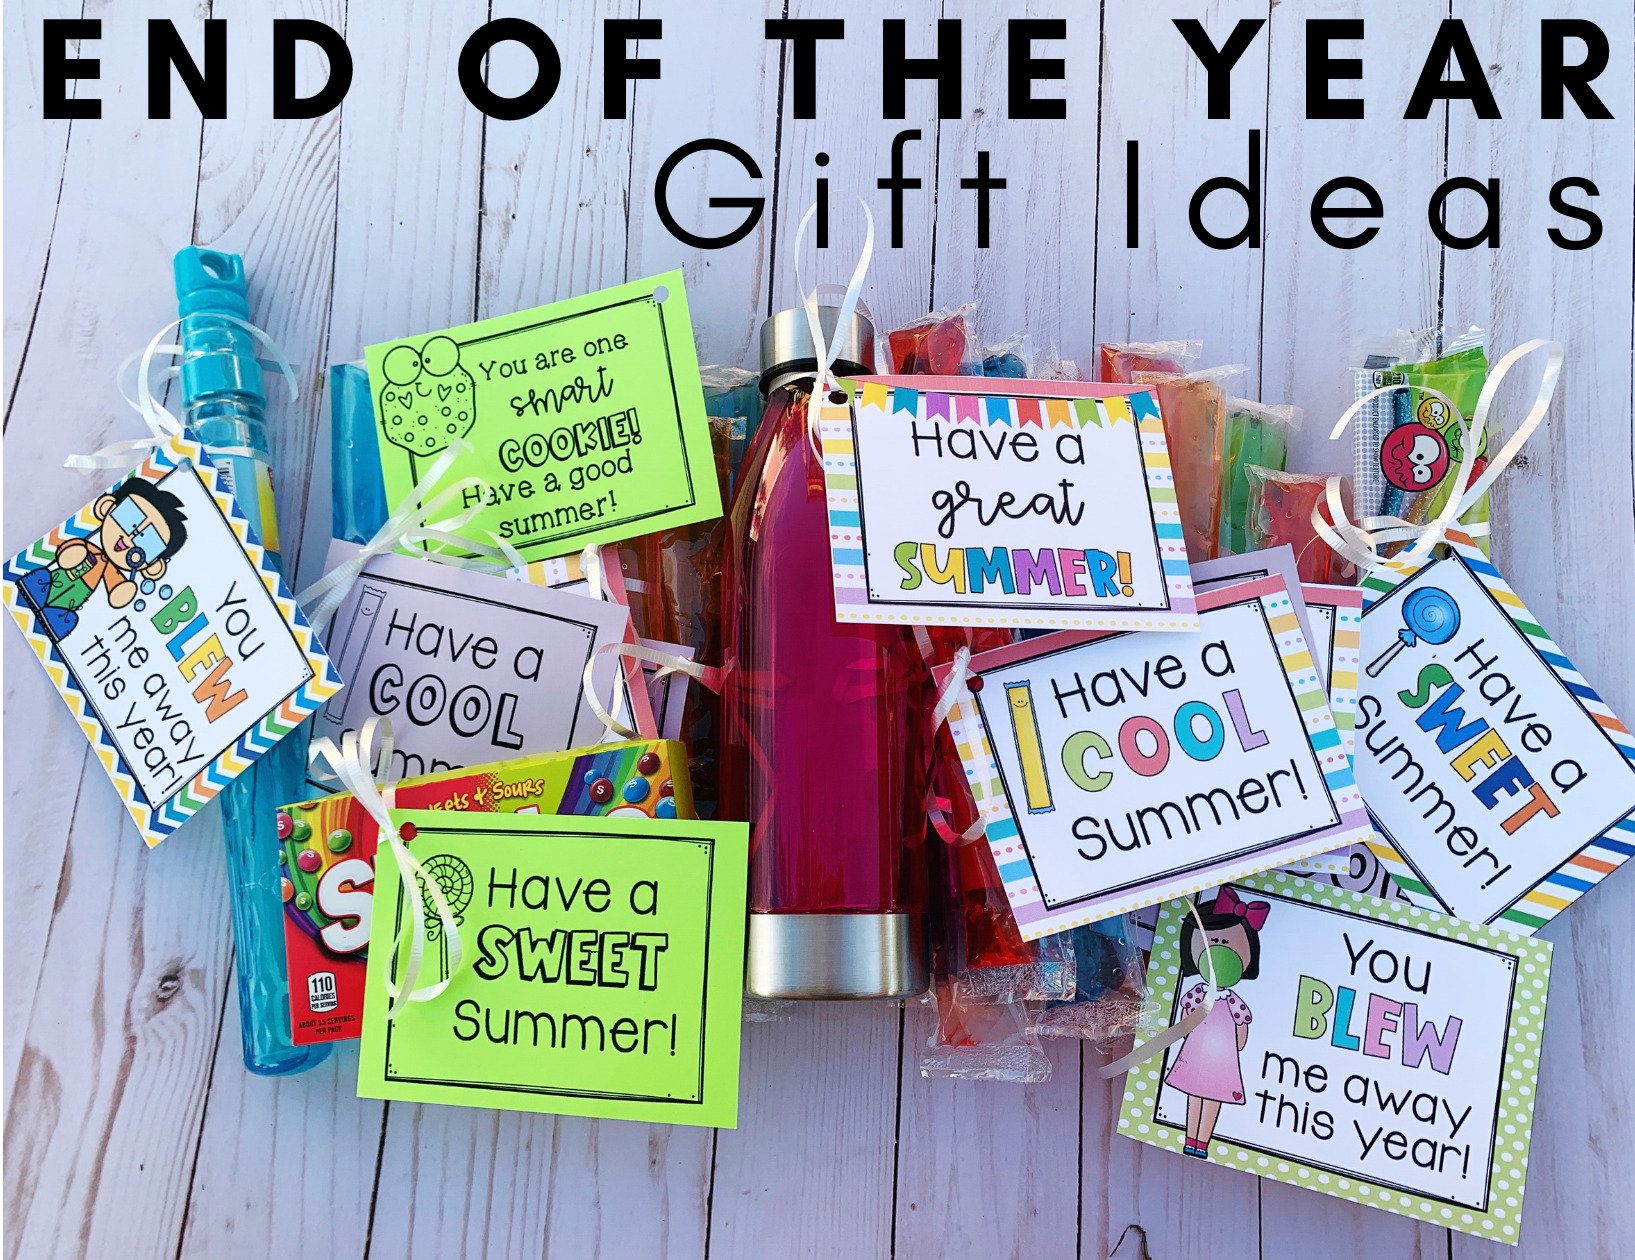 The Best 10-Year Anniversary Gift Ideas - 2023 Edition